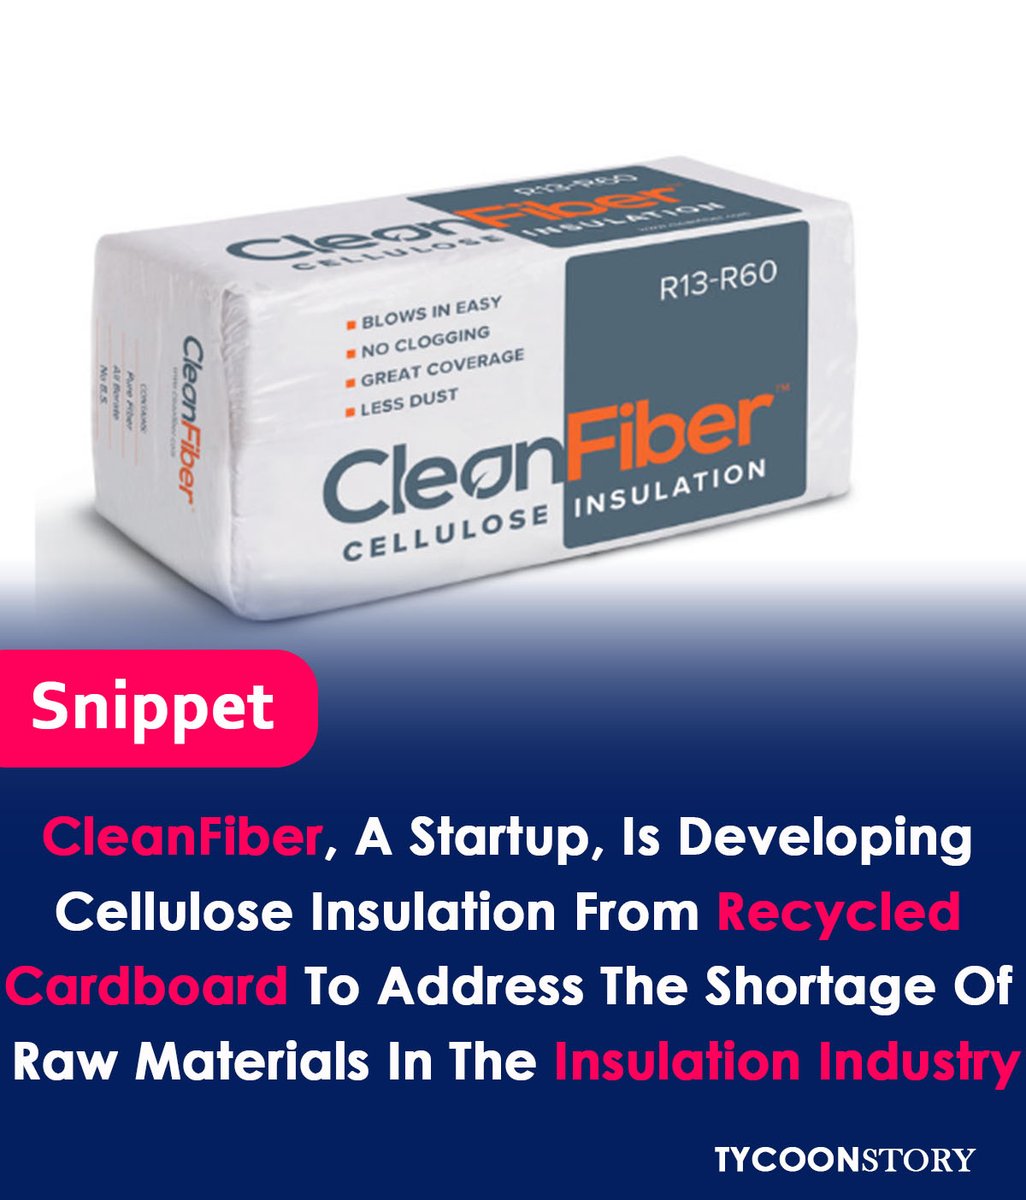 CleanFiber, a startup, is developing cellulose insulation from recycled cardboard
#CleanTech #Recycling #SustainableBuilding #CelluloseInsulation #ConstructionInnovation #CircularEconomy #DisruptiveTechnology #WasteReduction #BuiltGreen #InsulationSolutions